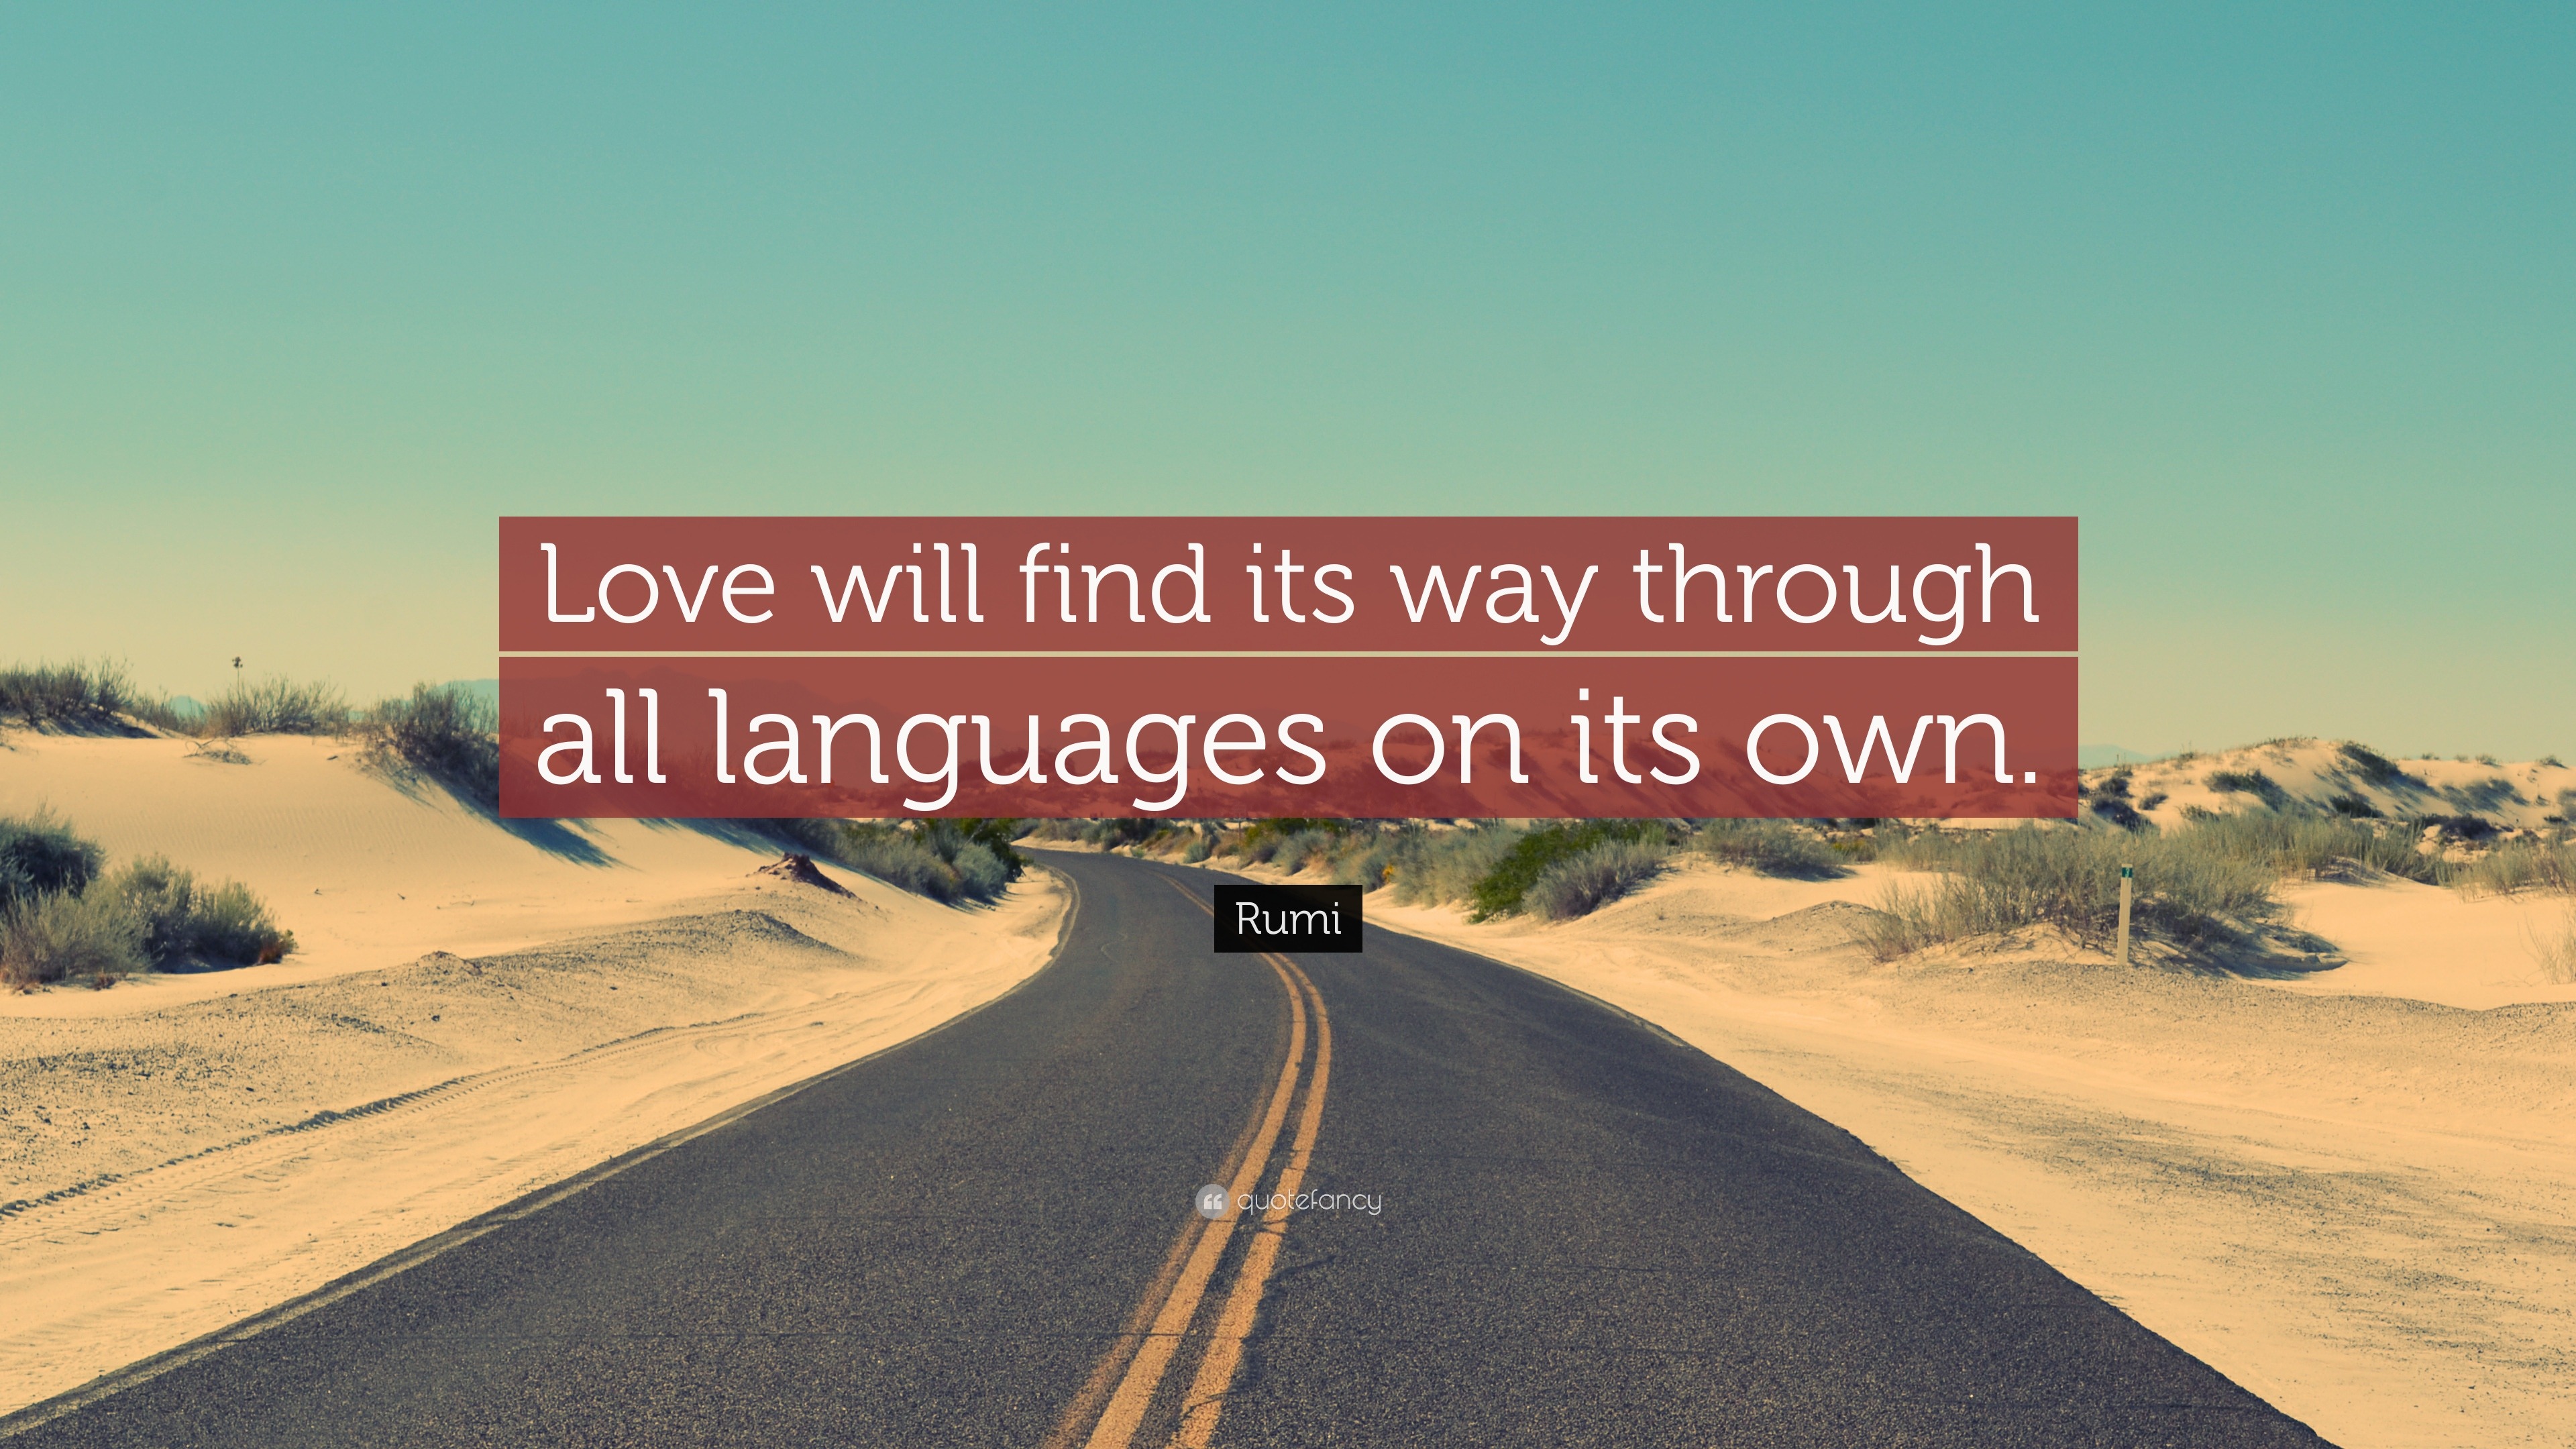 Rumi Quote “Love will find its way through all languages on its own